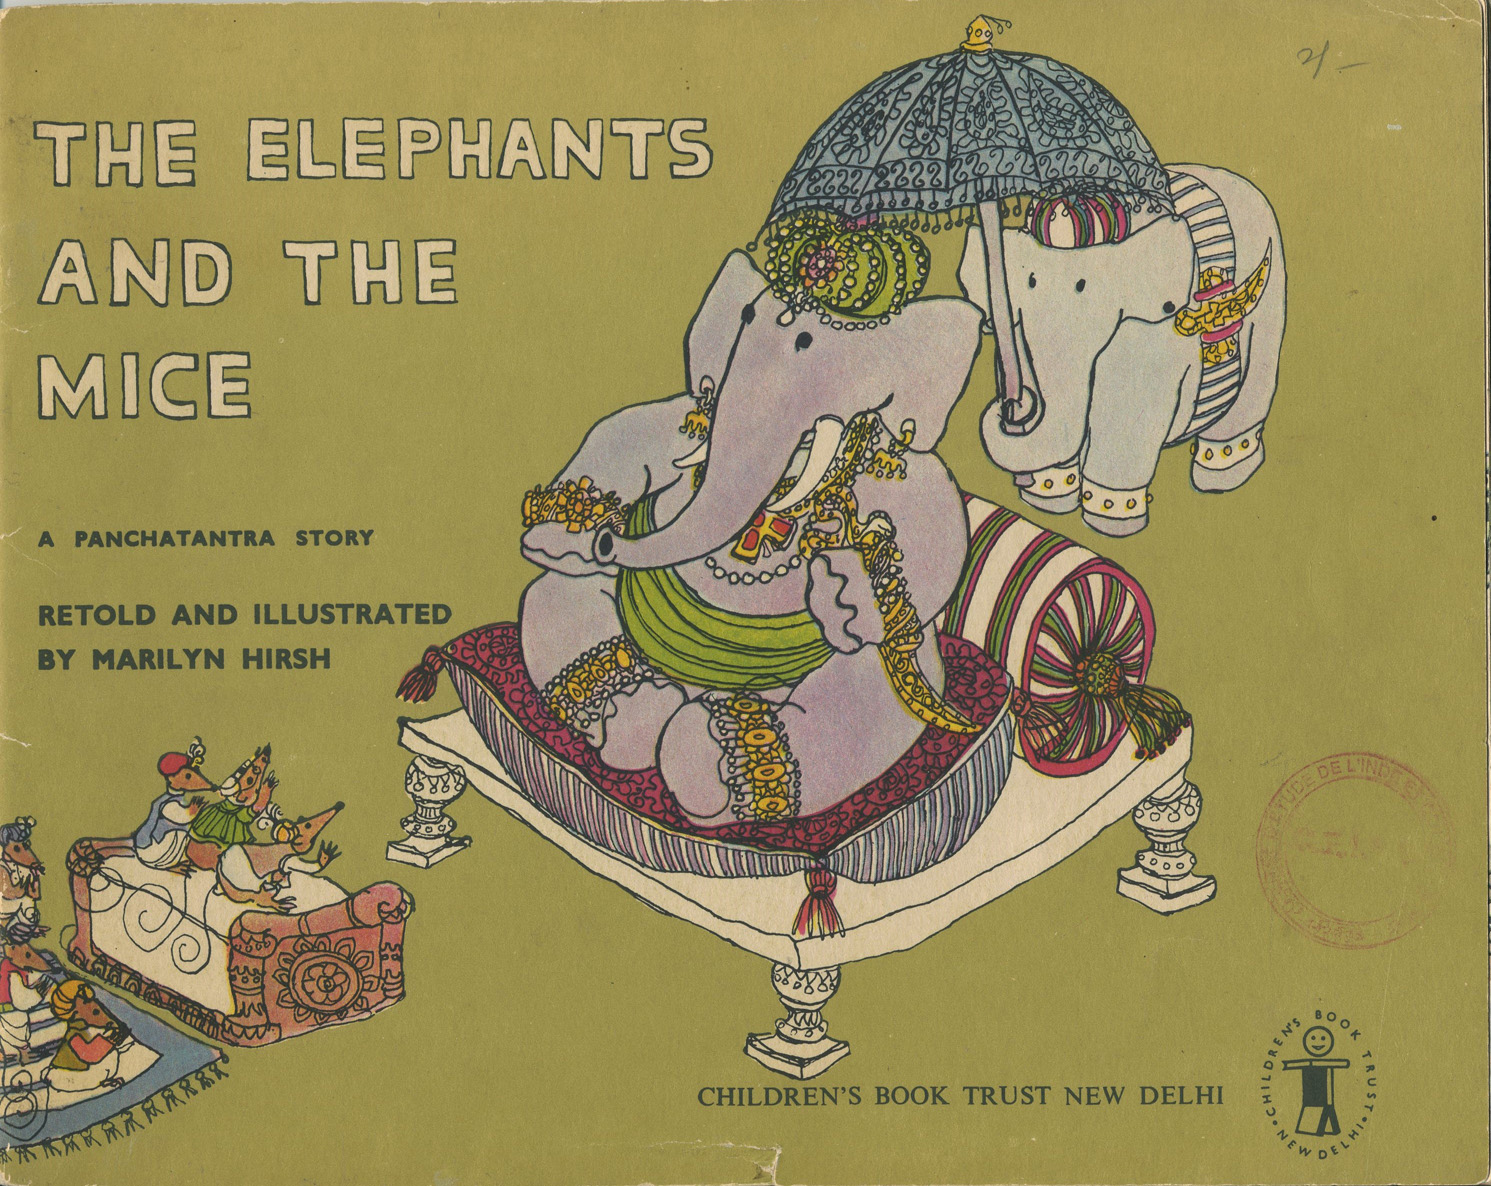 The elephants and the mice